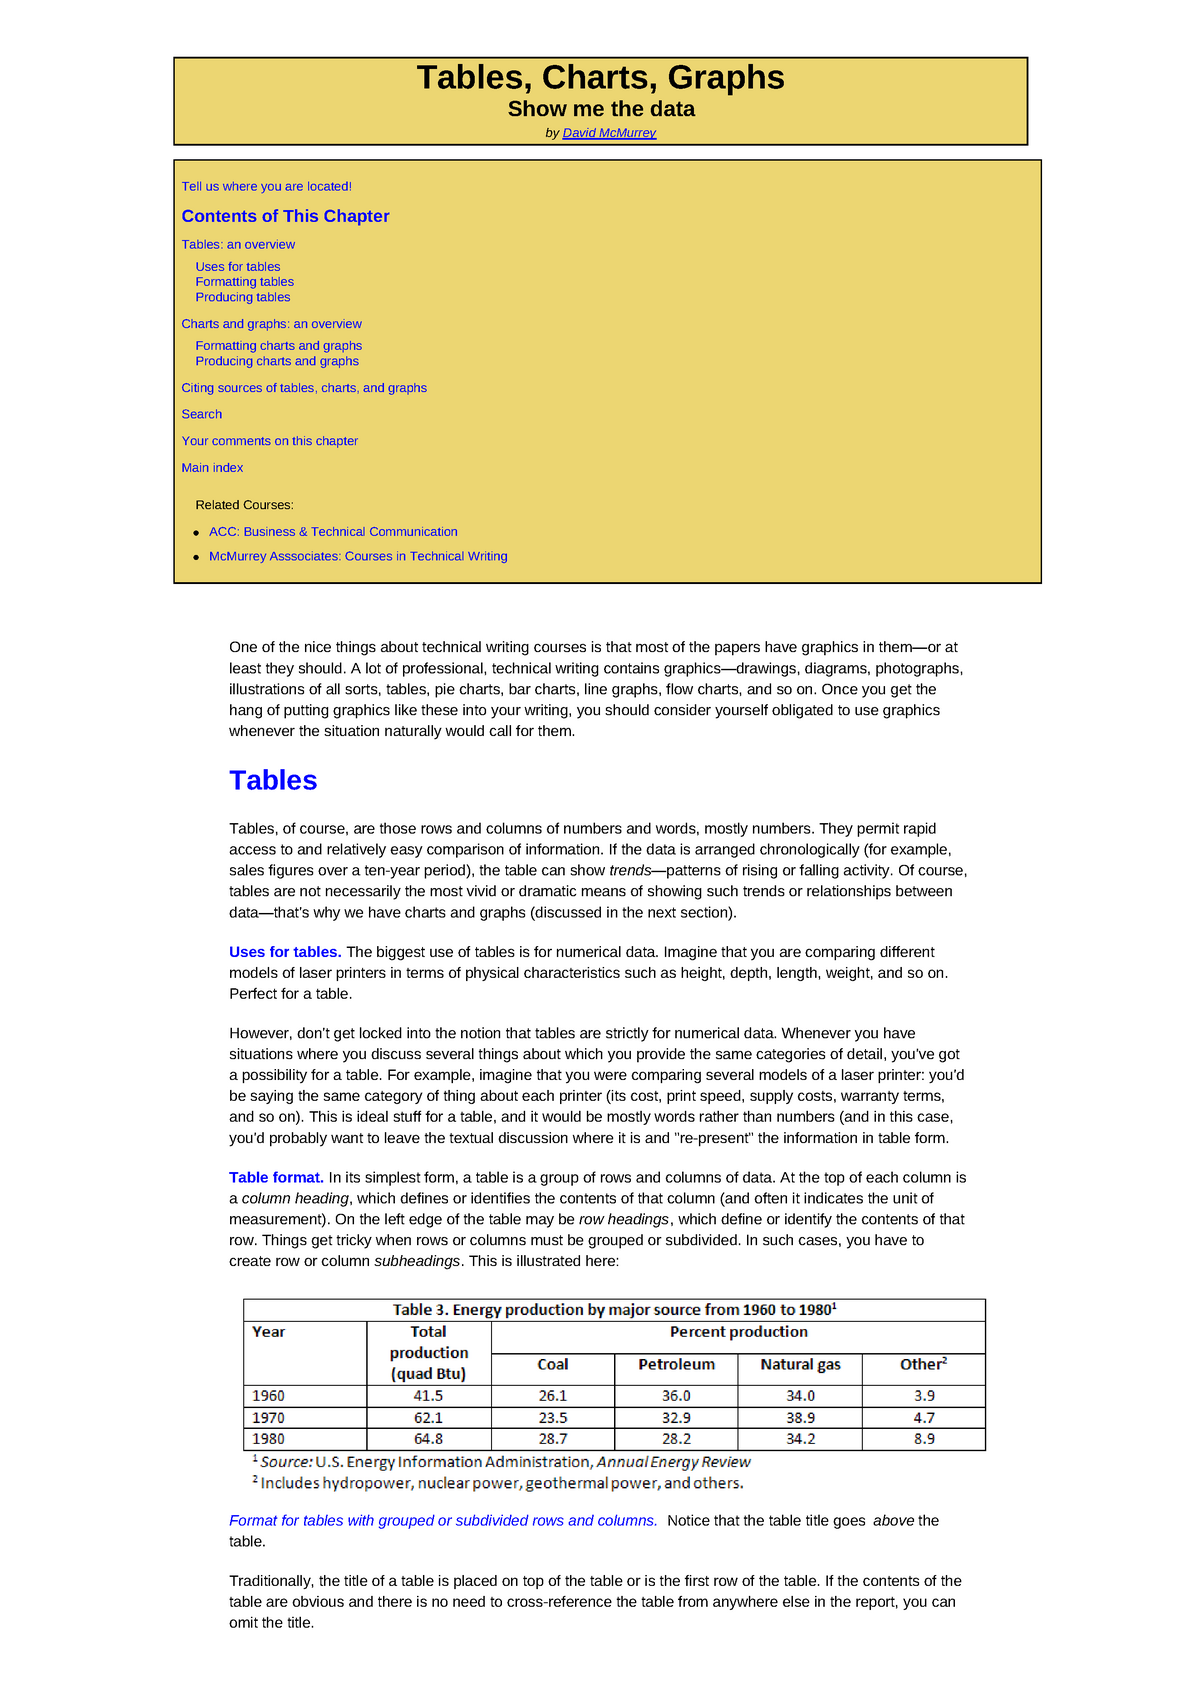 Use Of Charts Graphs And Tables In Technical Writing